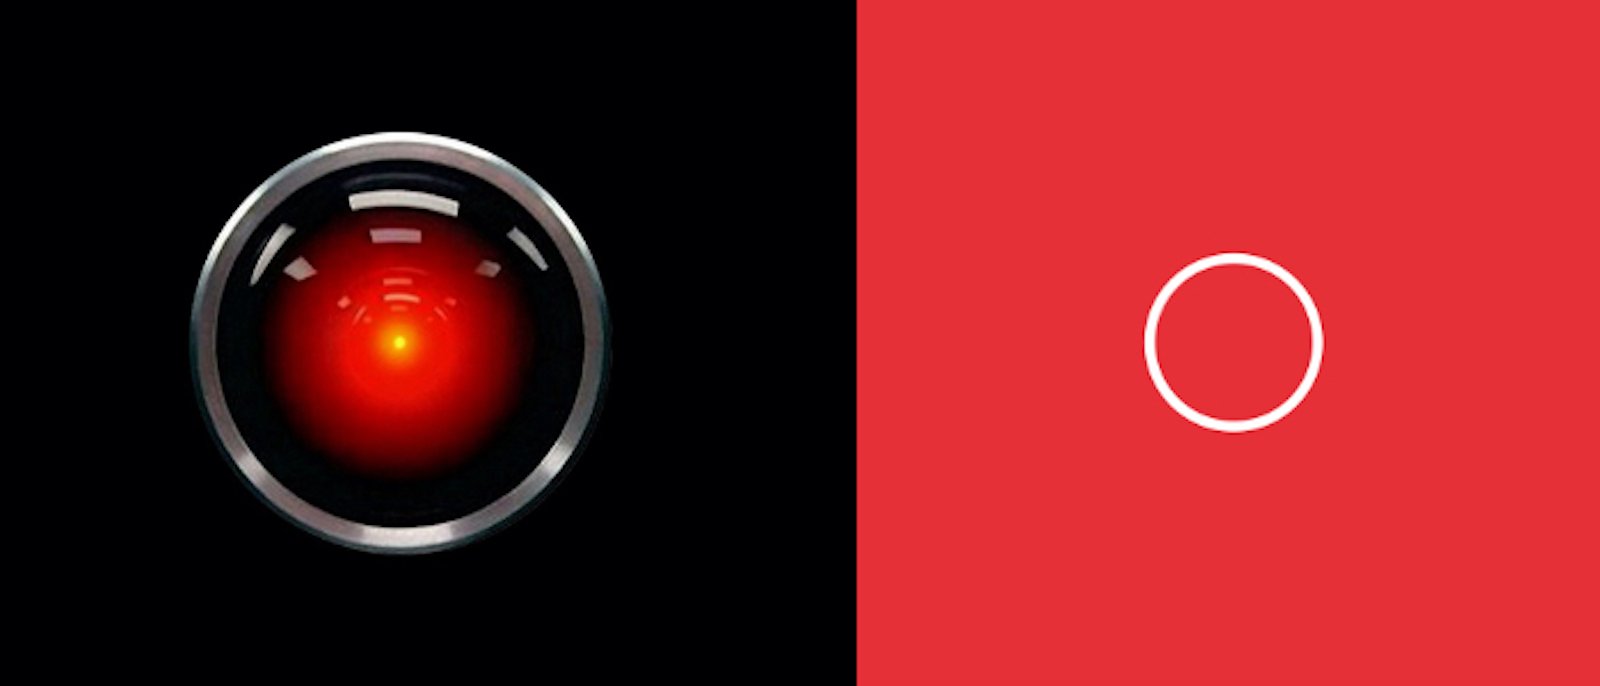 Visual representations of HAL 9000 computer from 2001, and the voice from the movie Her.